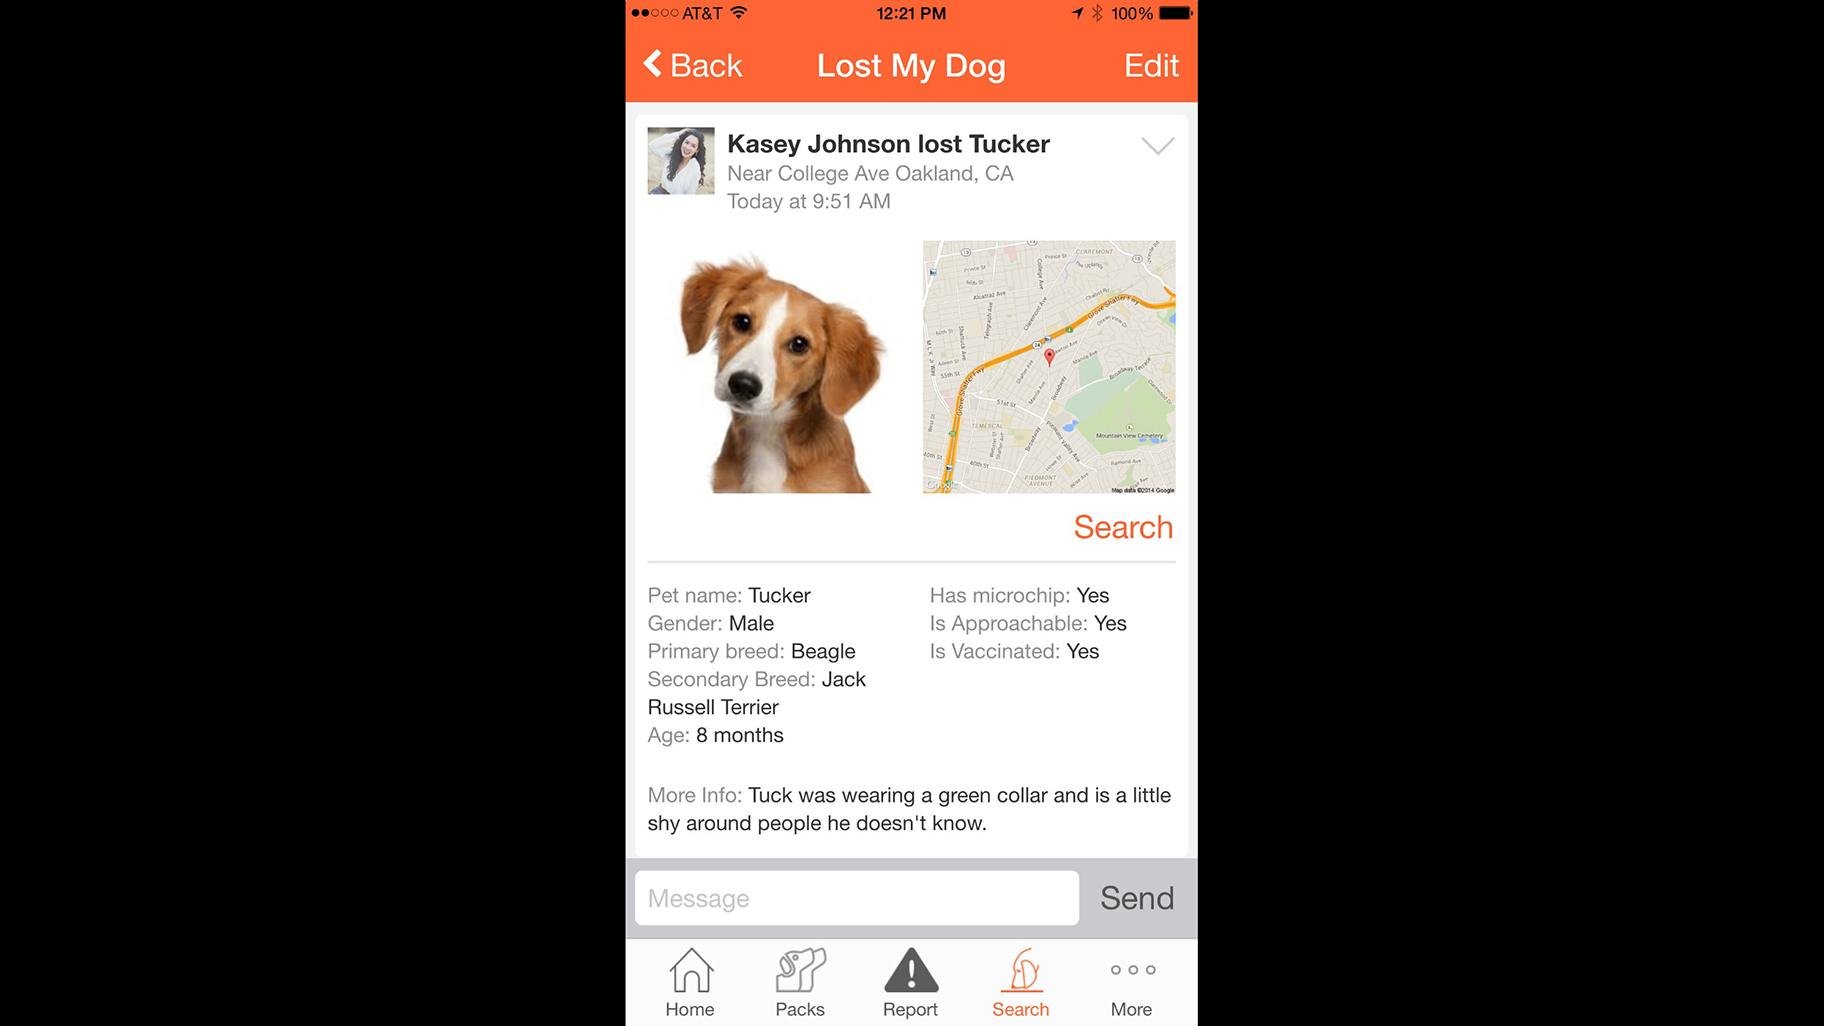 Owners who upload photos of their pets to Finding Rover can report a pet lost, enabling other users of the app to identify and return the pet. (Courtesy Finding Rover)